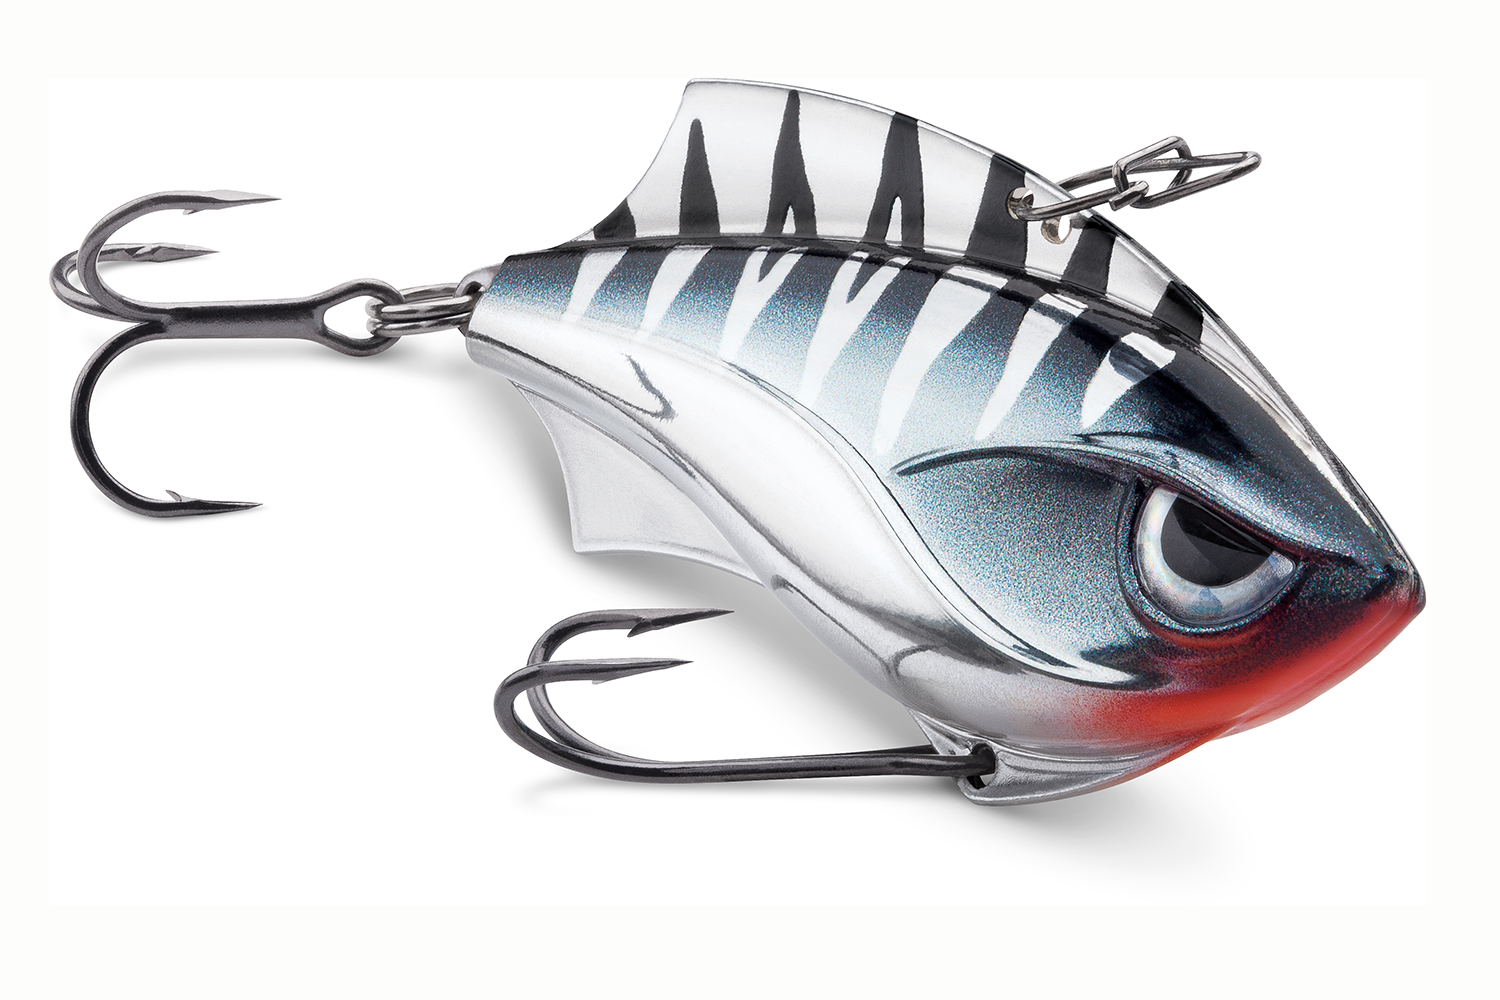 <p><b>Rapala Rap-V</b></p>
<p>The new Rap-V Blade is the perfect balance of metal, plastic and Rapala expertise. This extremely versatile bait produces instant vibration on the lift or retrieve. Weighs in at 1/2 oz, 2.5â long and has VMC No. 4 double hook and a No. 6 treble. </p>
<p><a href=